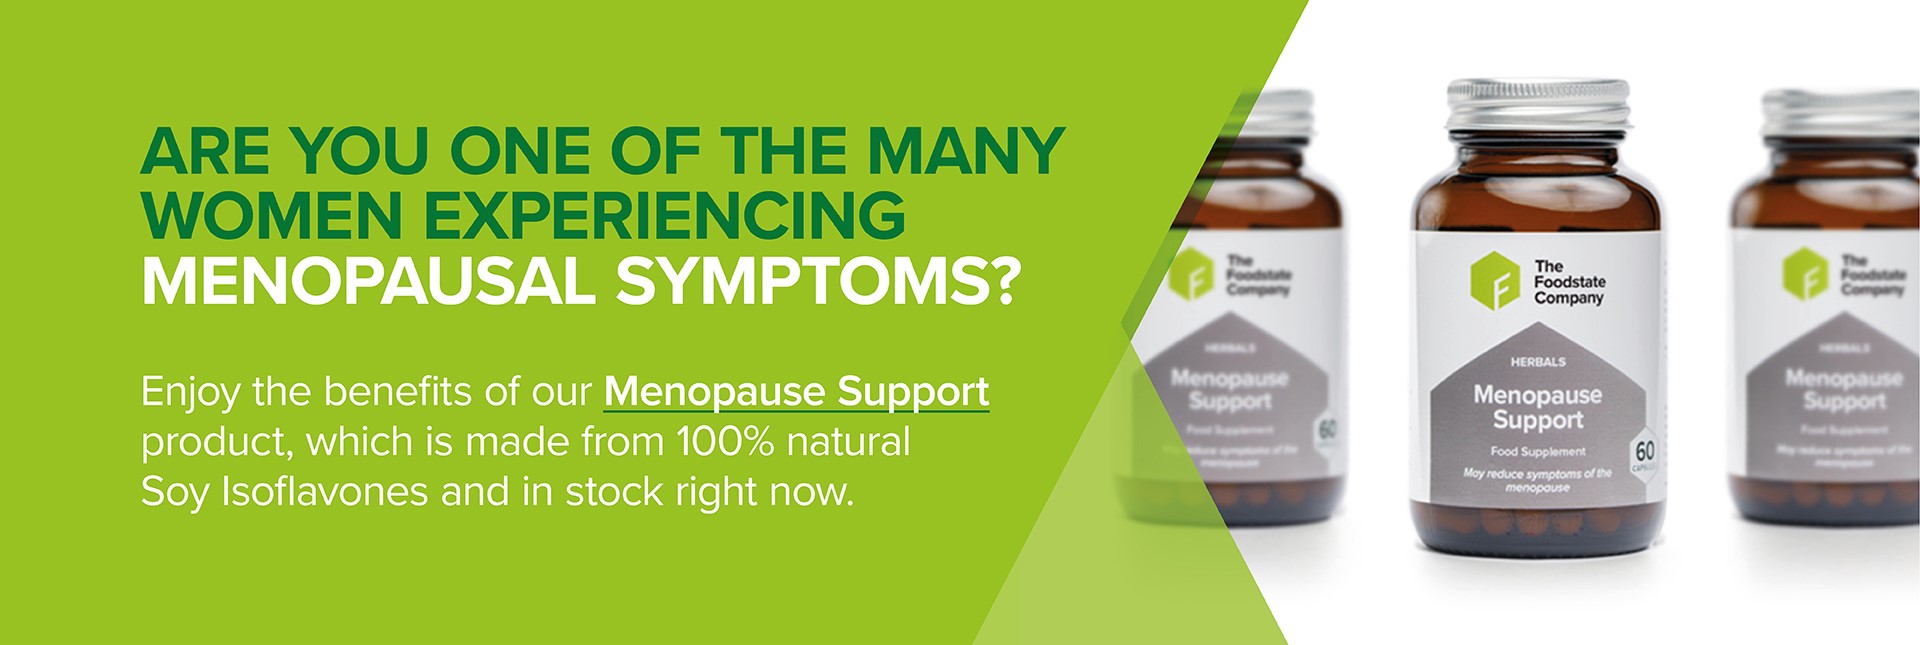 Menopause Support Product Ad